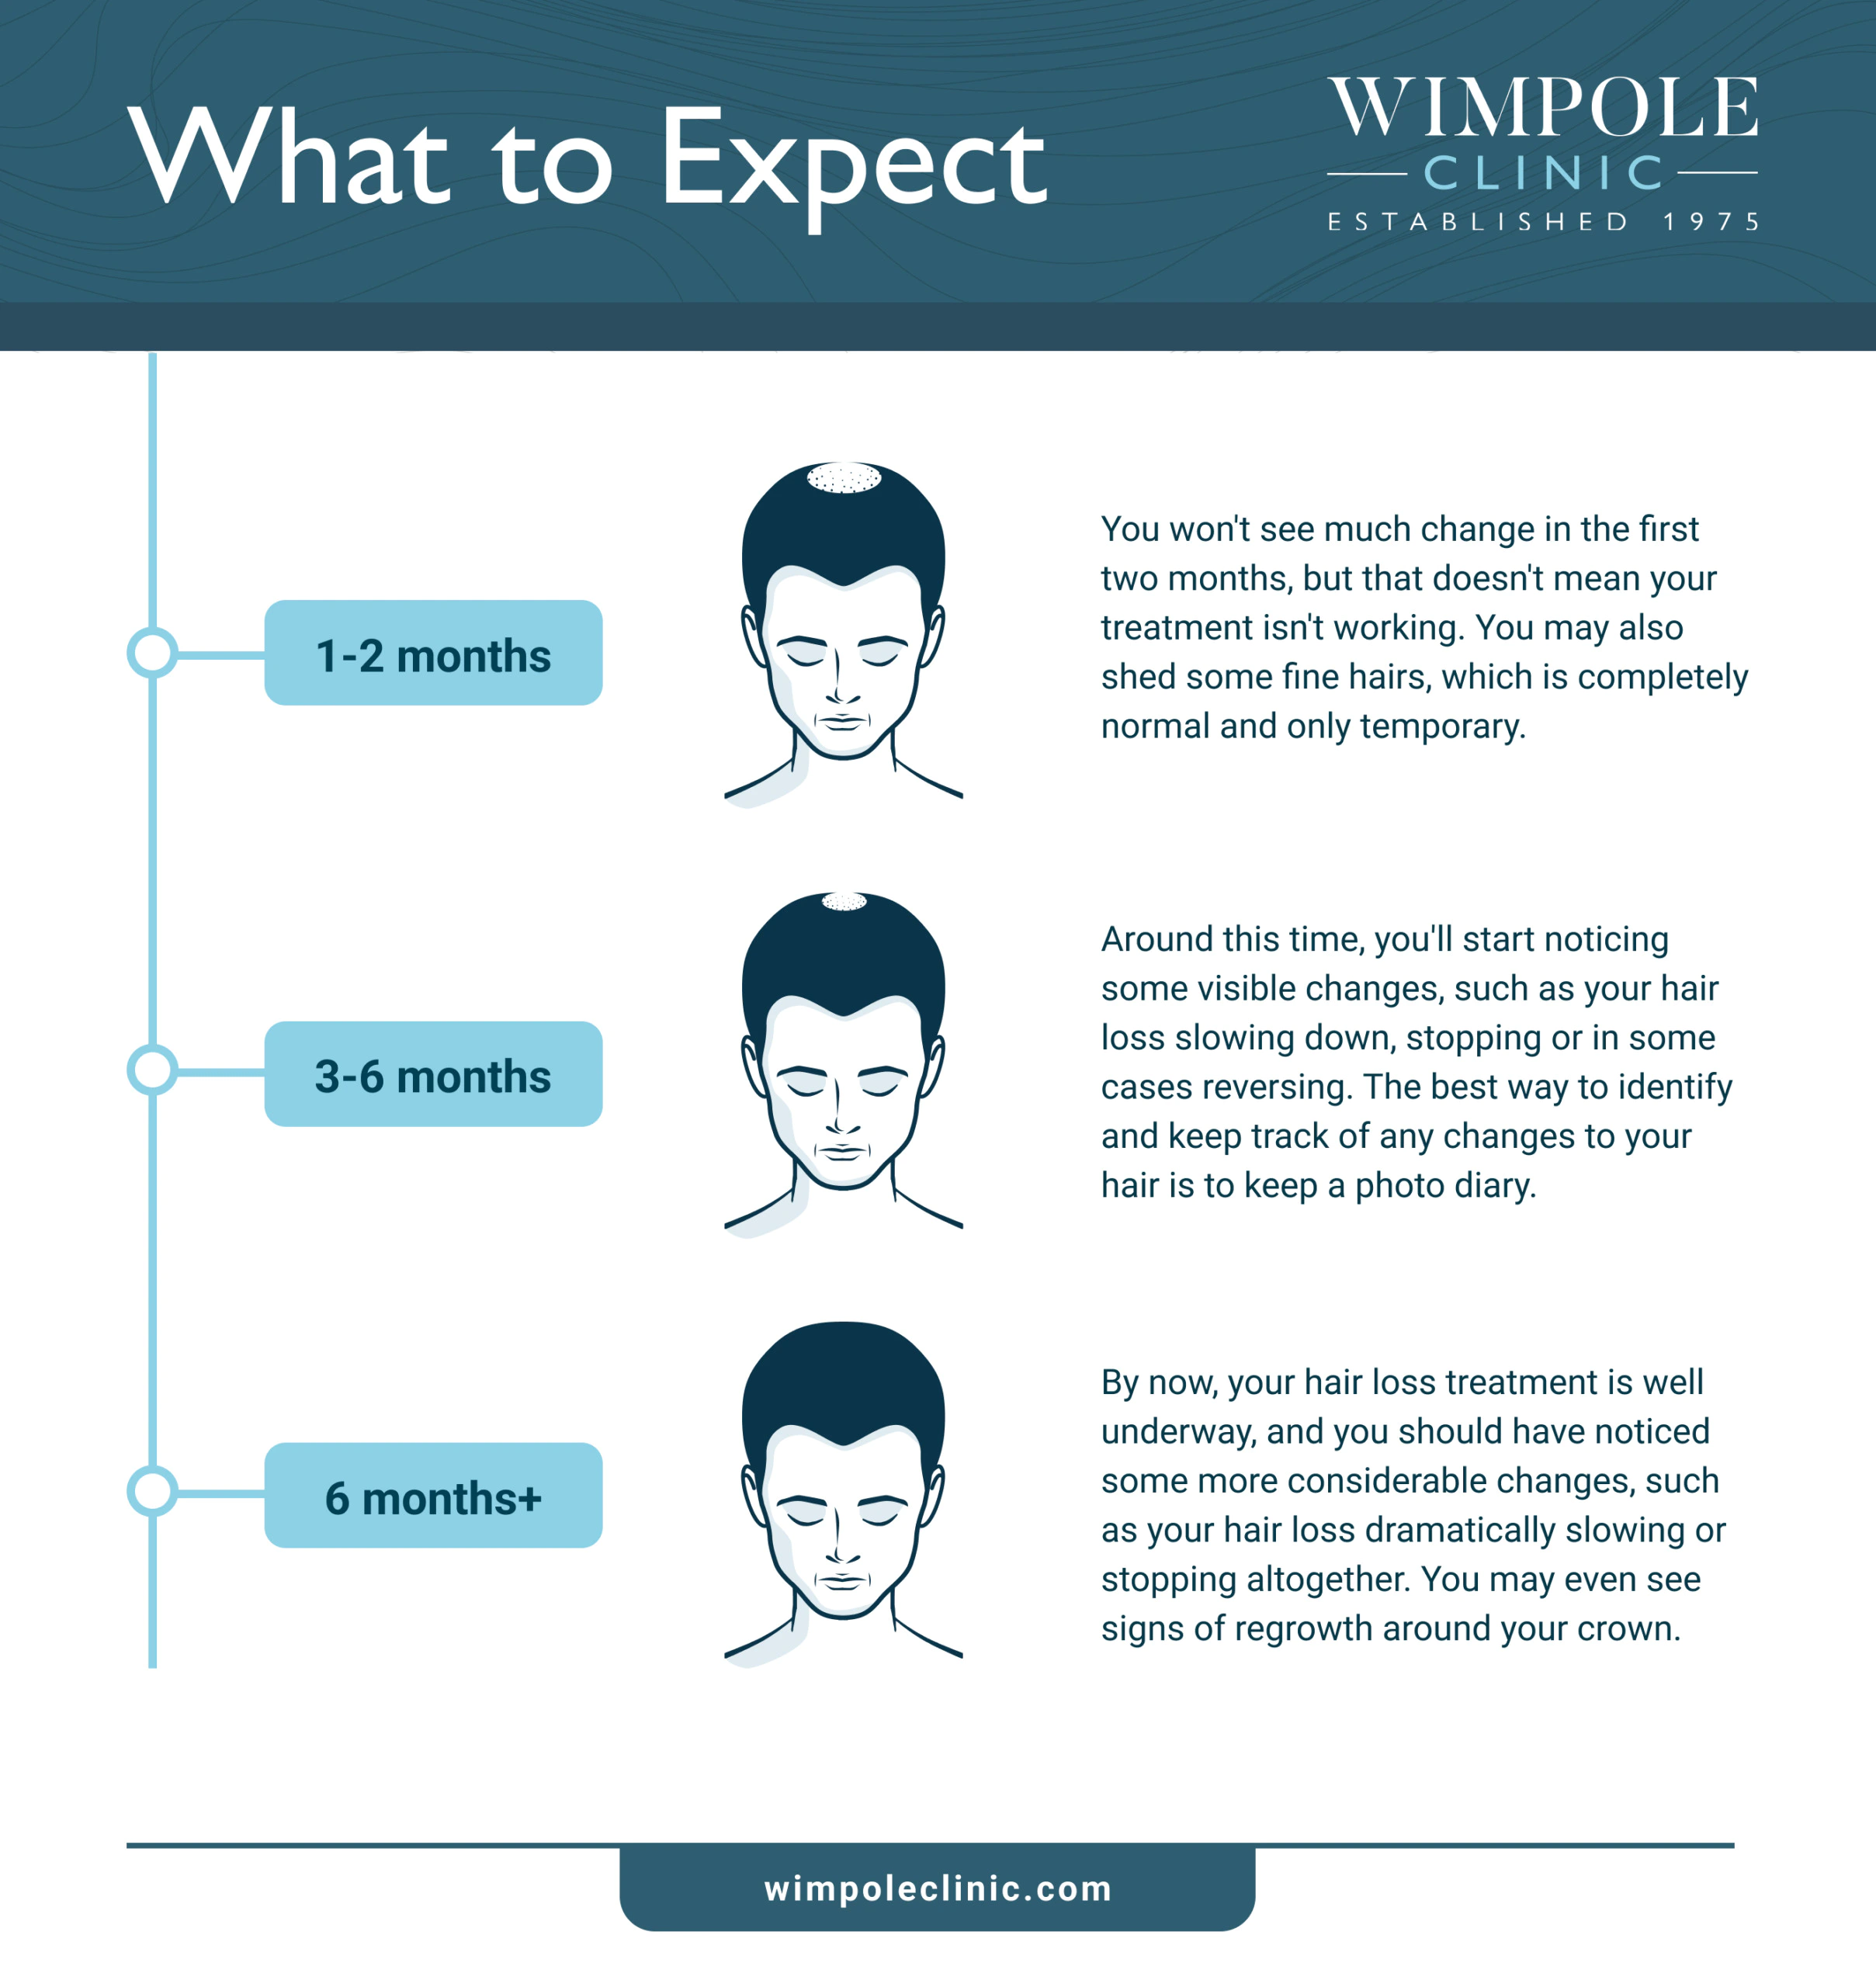 What to expect in terms of hair growth results when taking Finasteride